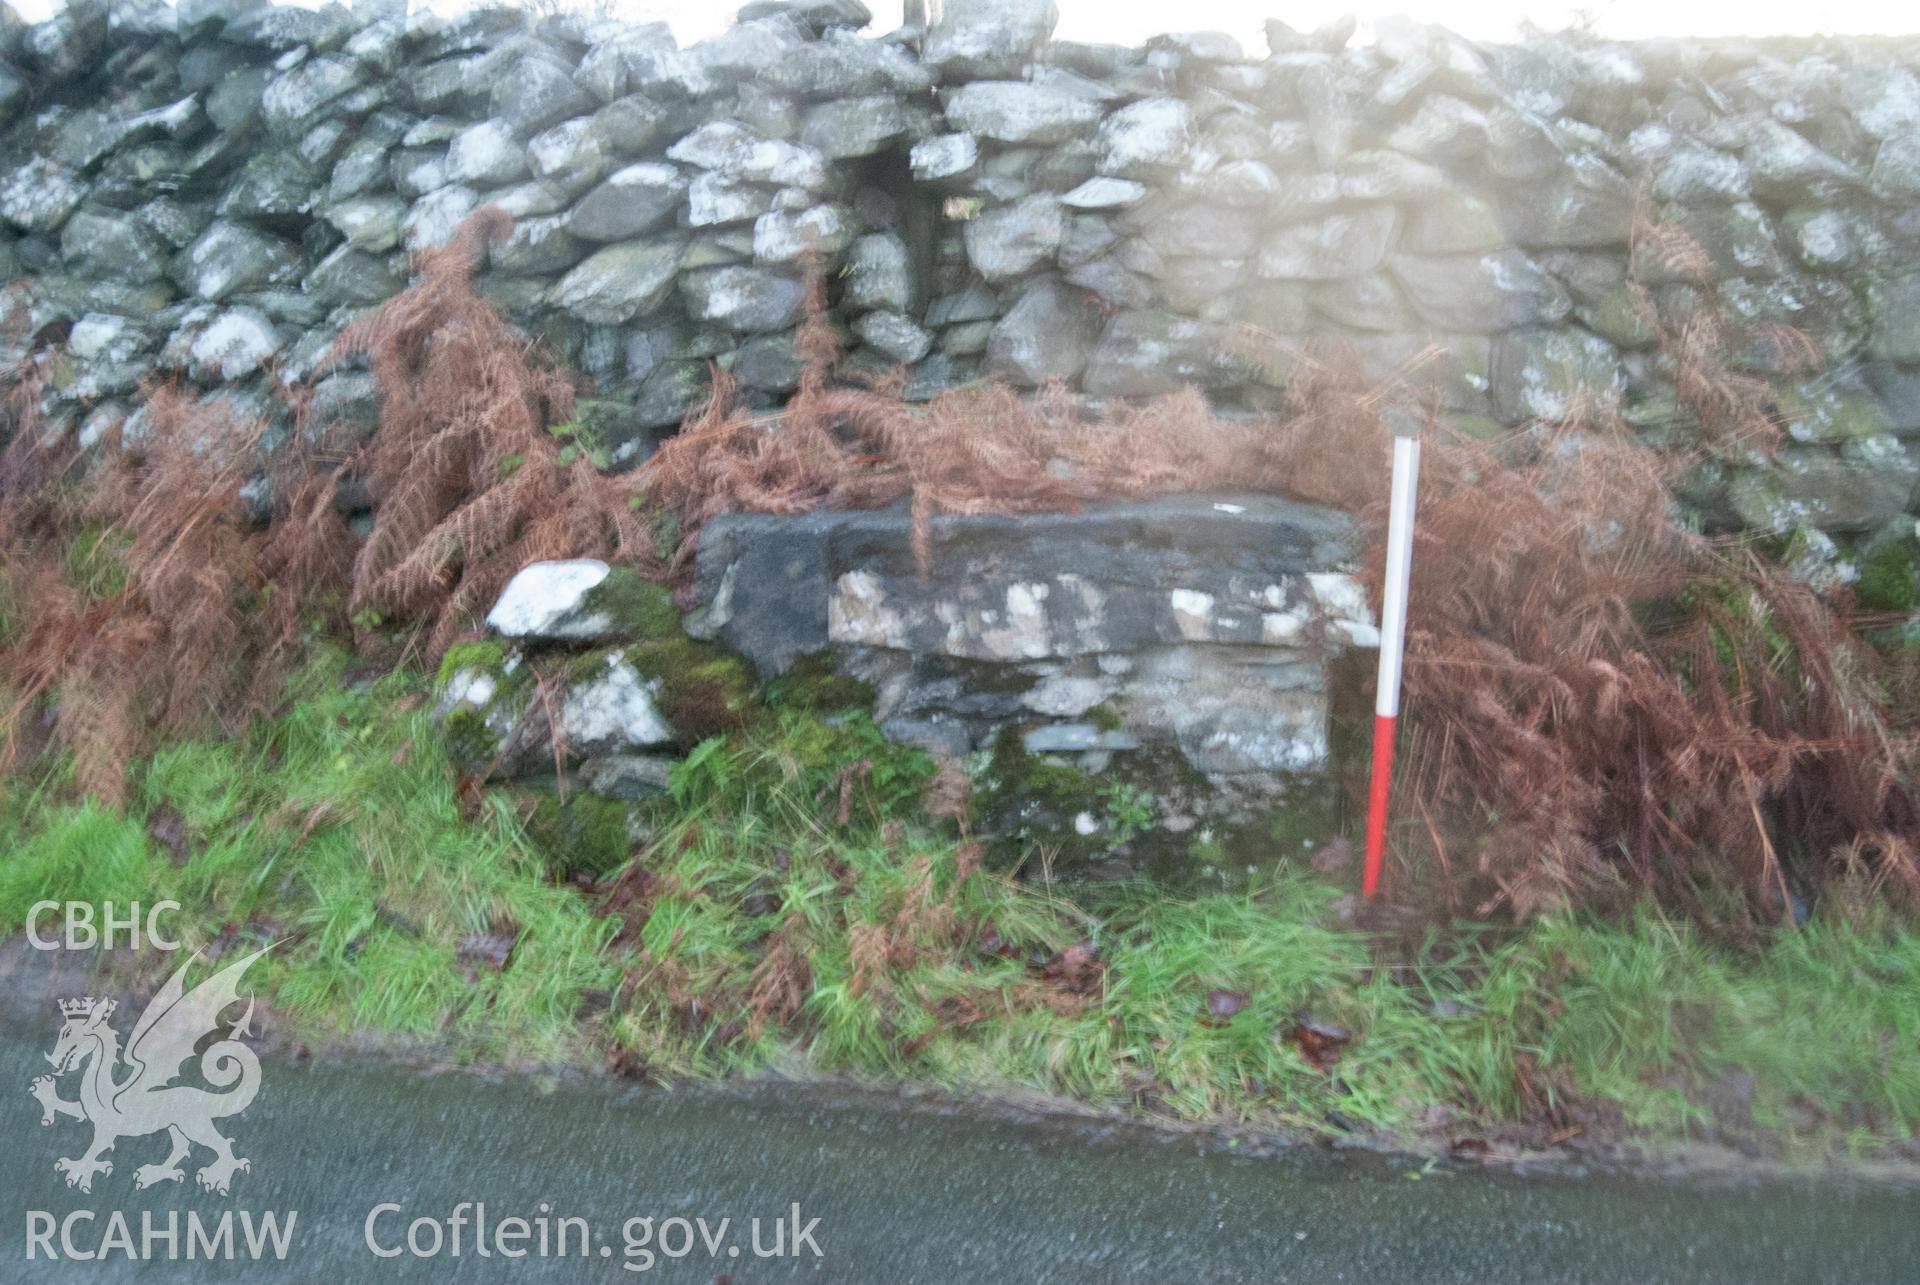 View from east, showing view of milk churn stand opposite Tyddyn Bach (Blurry)